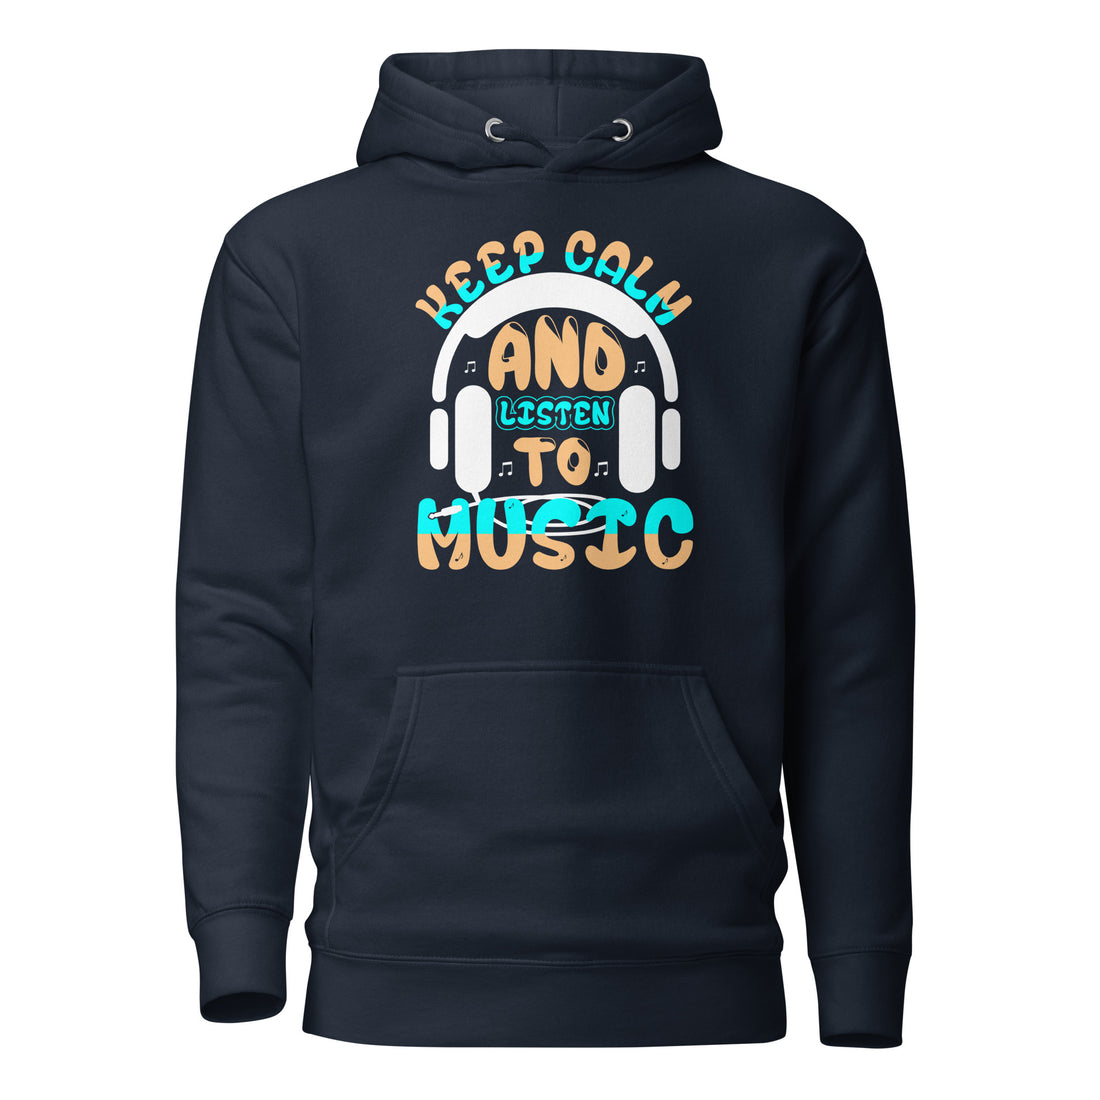 Hoodie - Keep Calm and Listen to Music